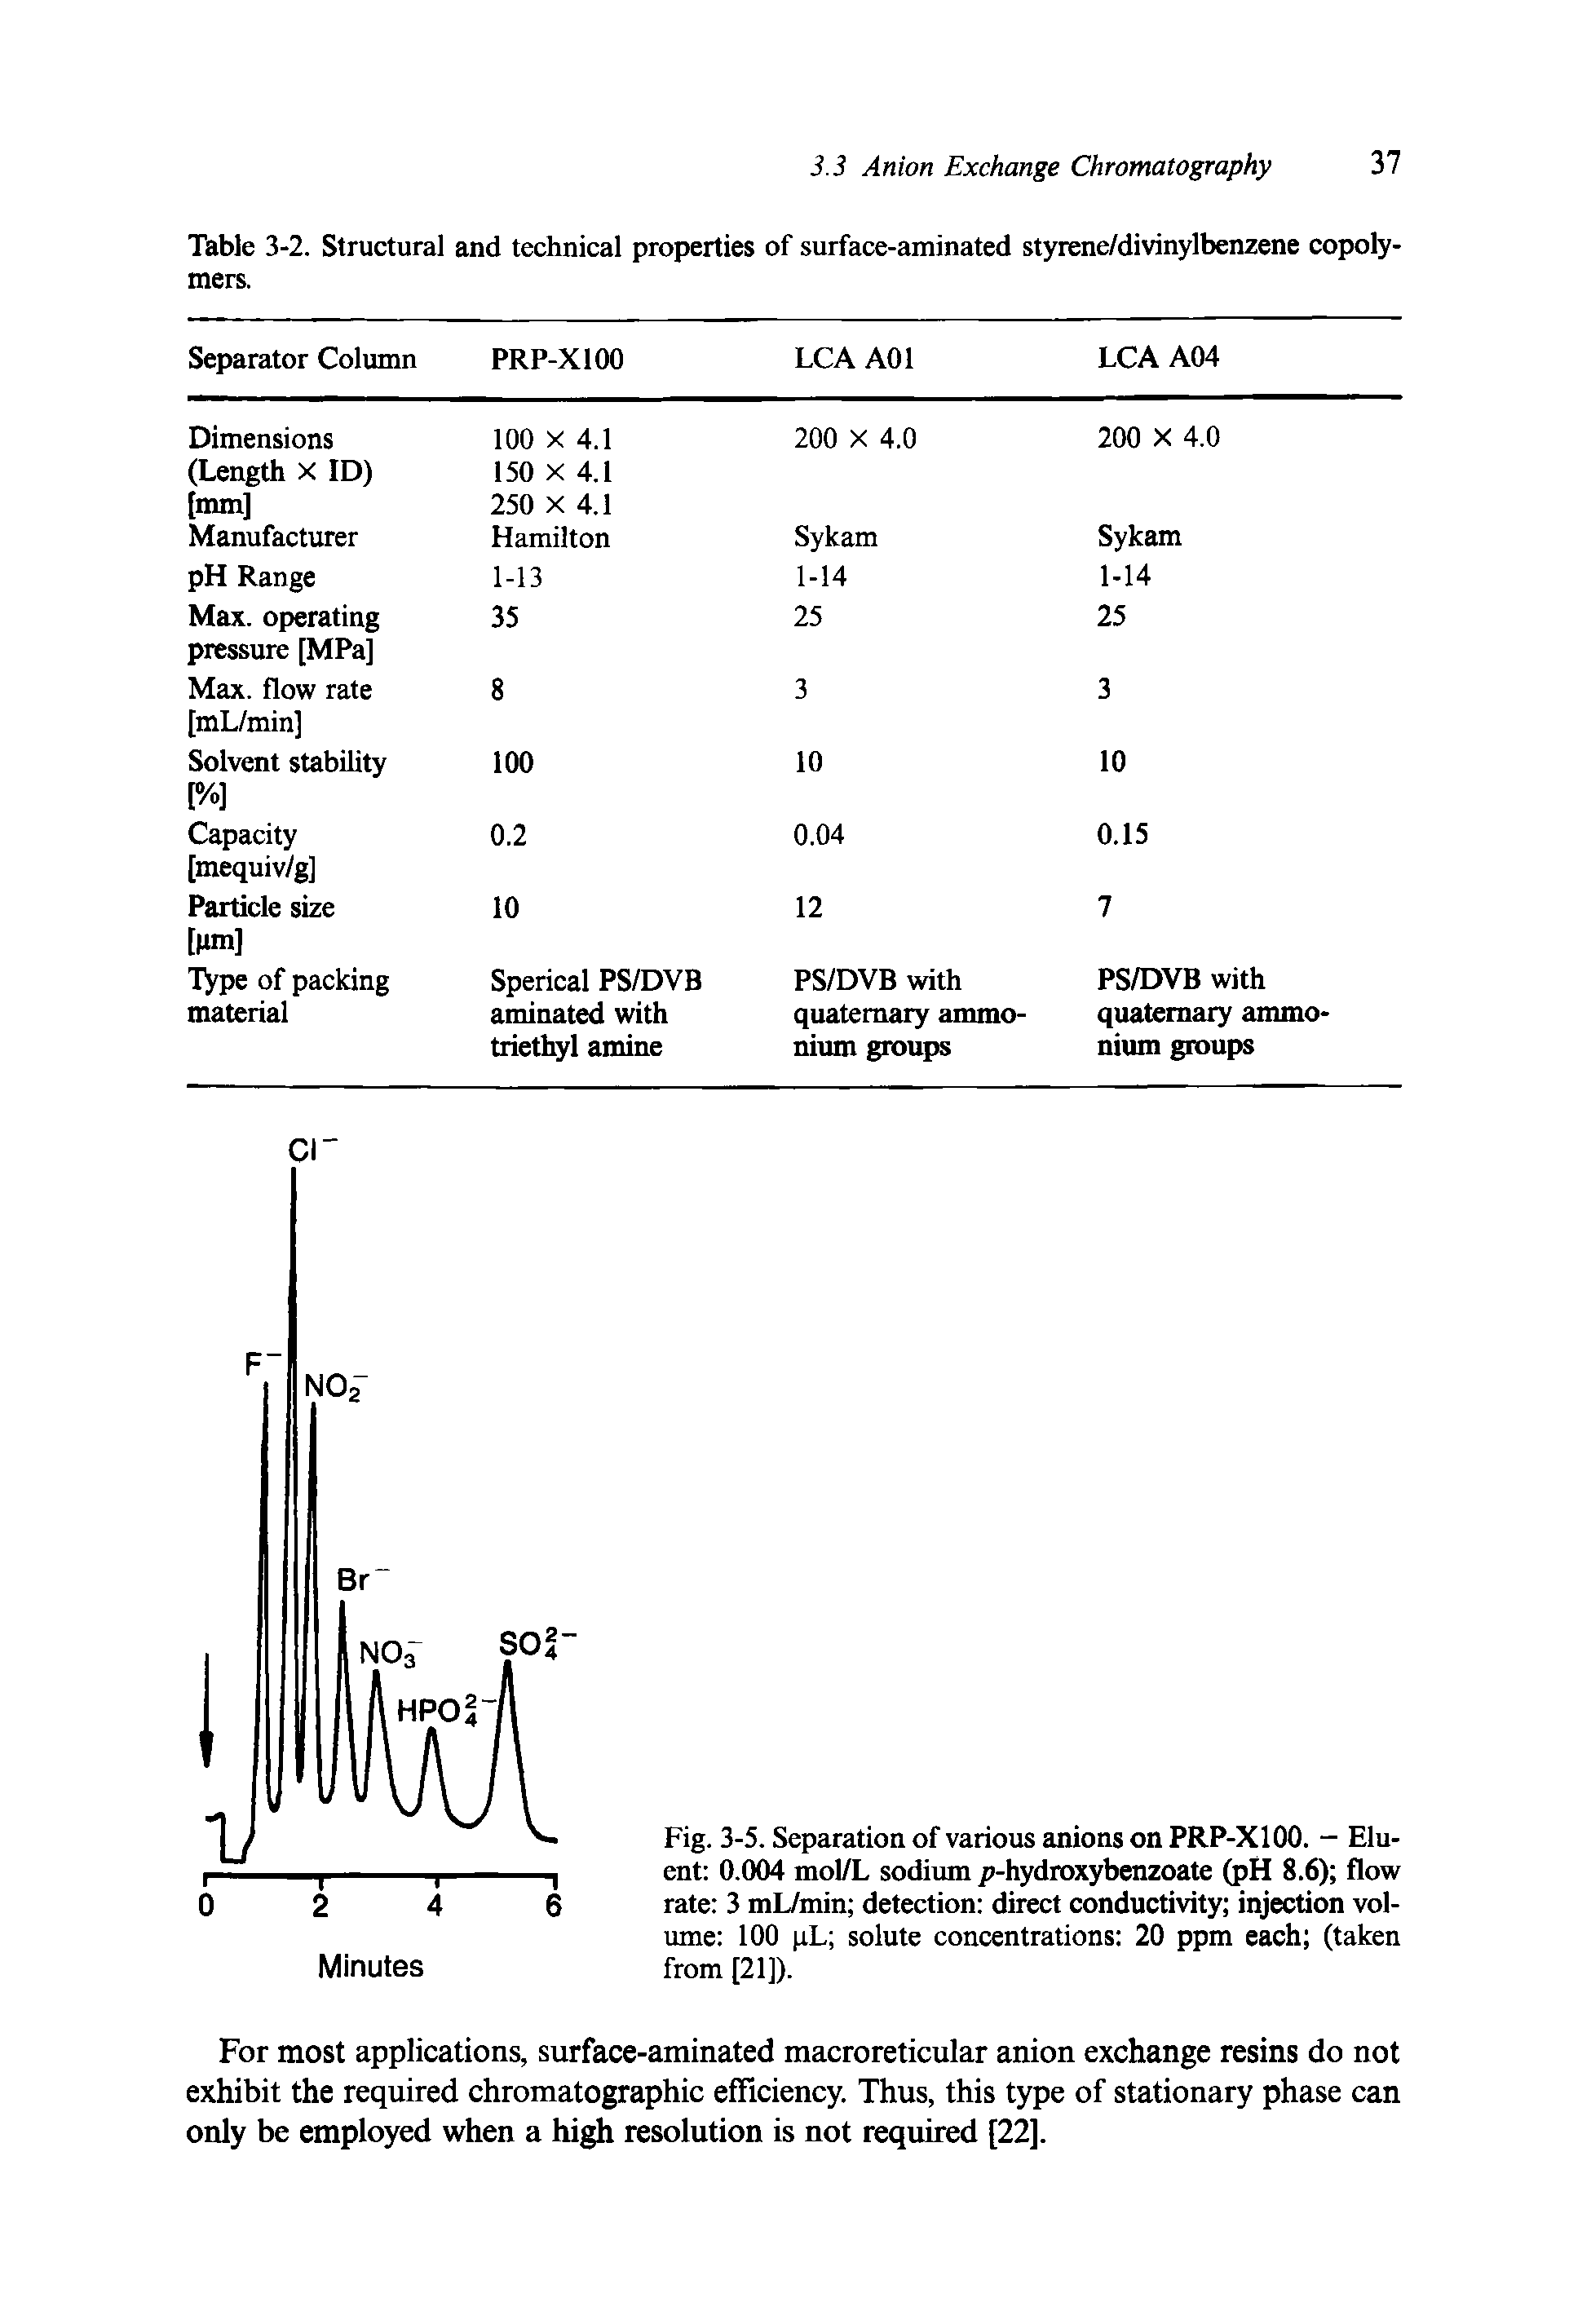 Fig. 3-5. Separation of various anions on PRP-X100. - Eluent 0.004 mol/L sodium p-hydroxybenzoate (pH 8.6) flow rate 3 mL/min detection direct conductivity injection volume 100 pL solute concentrations 20 ppm each (taken from [21]).